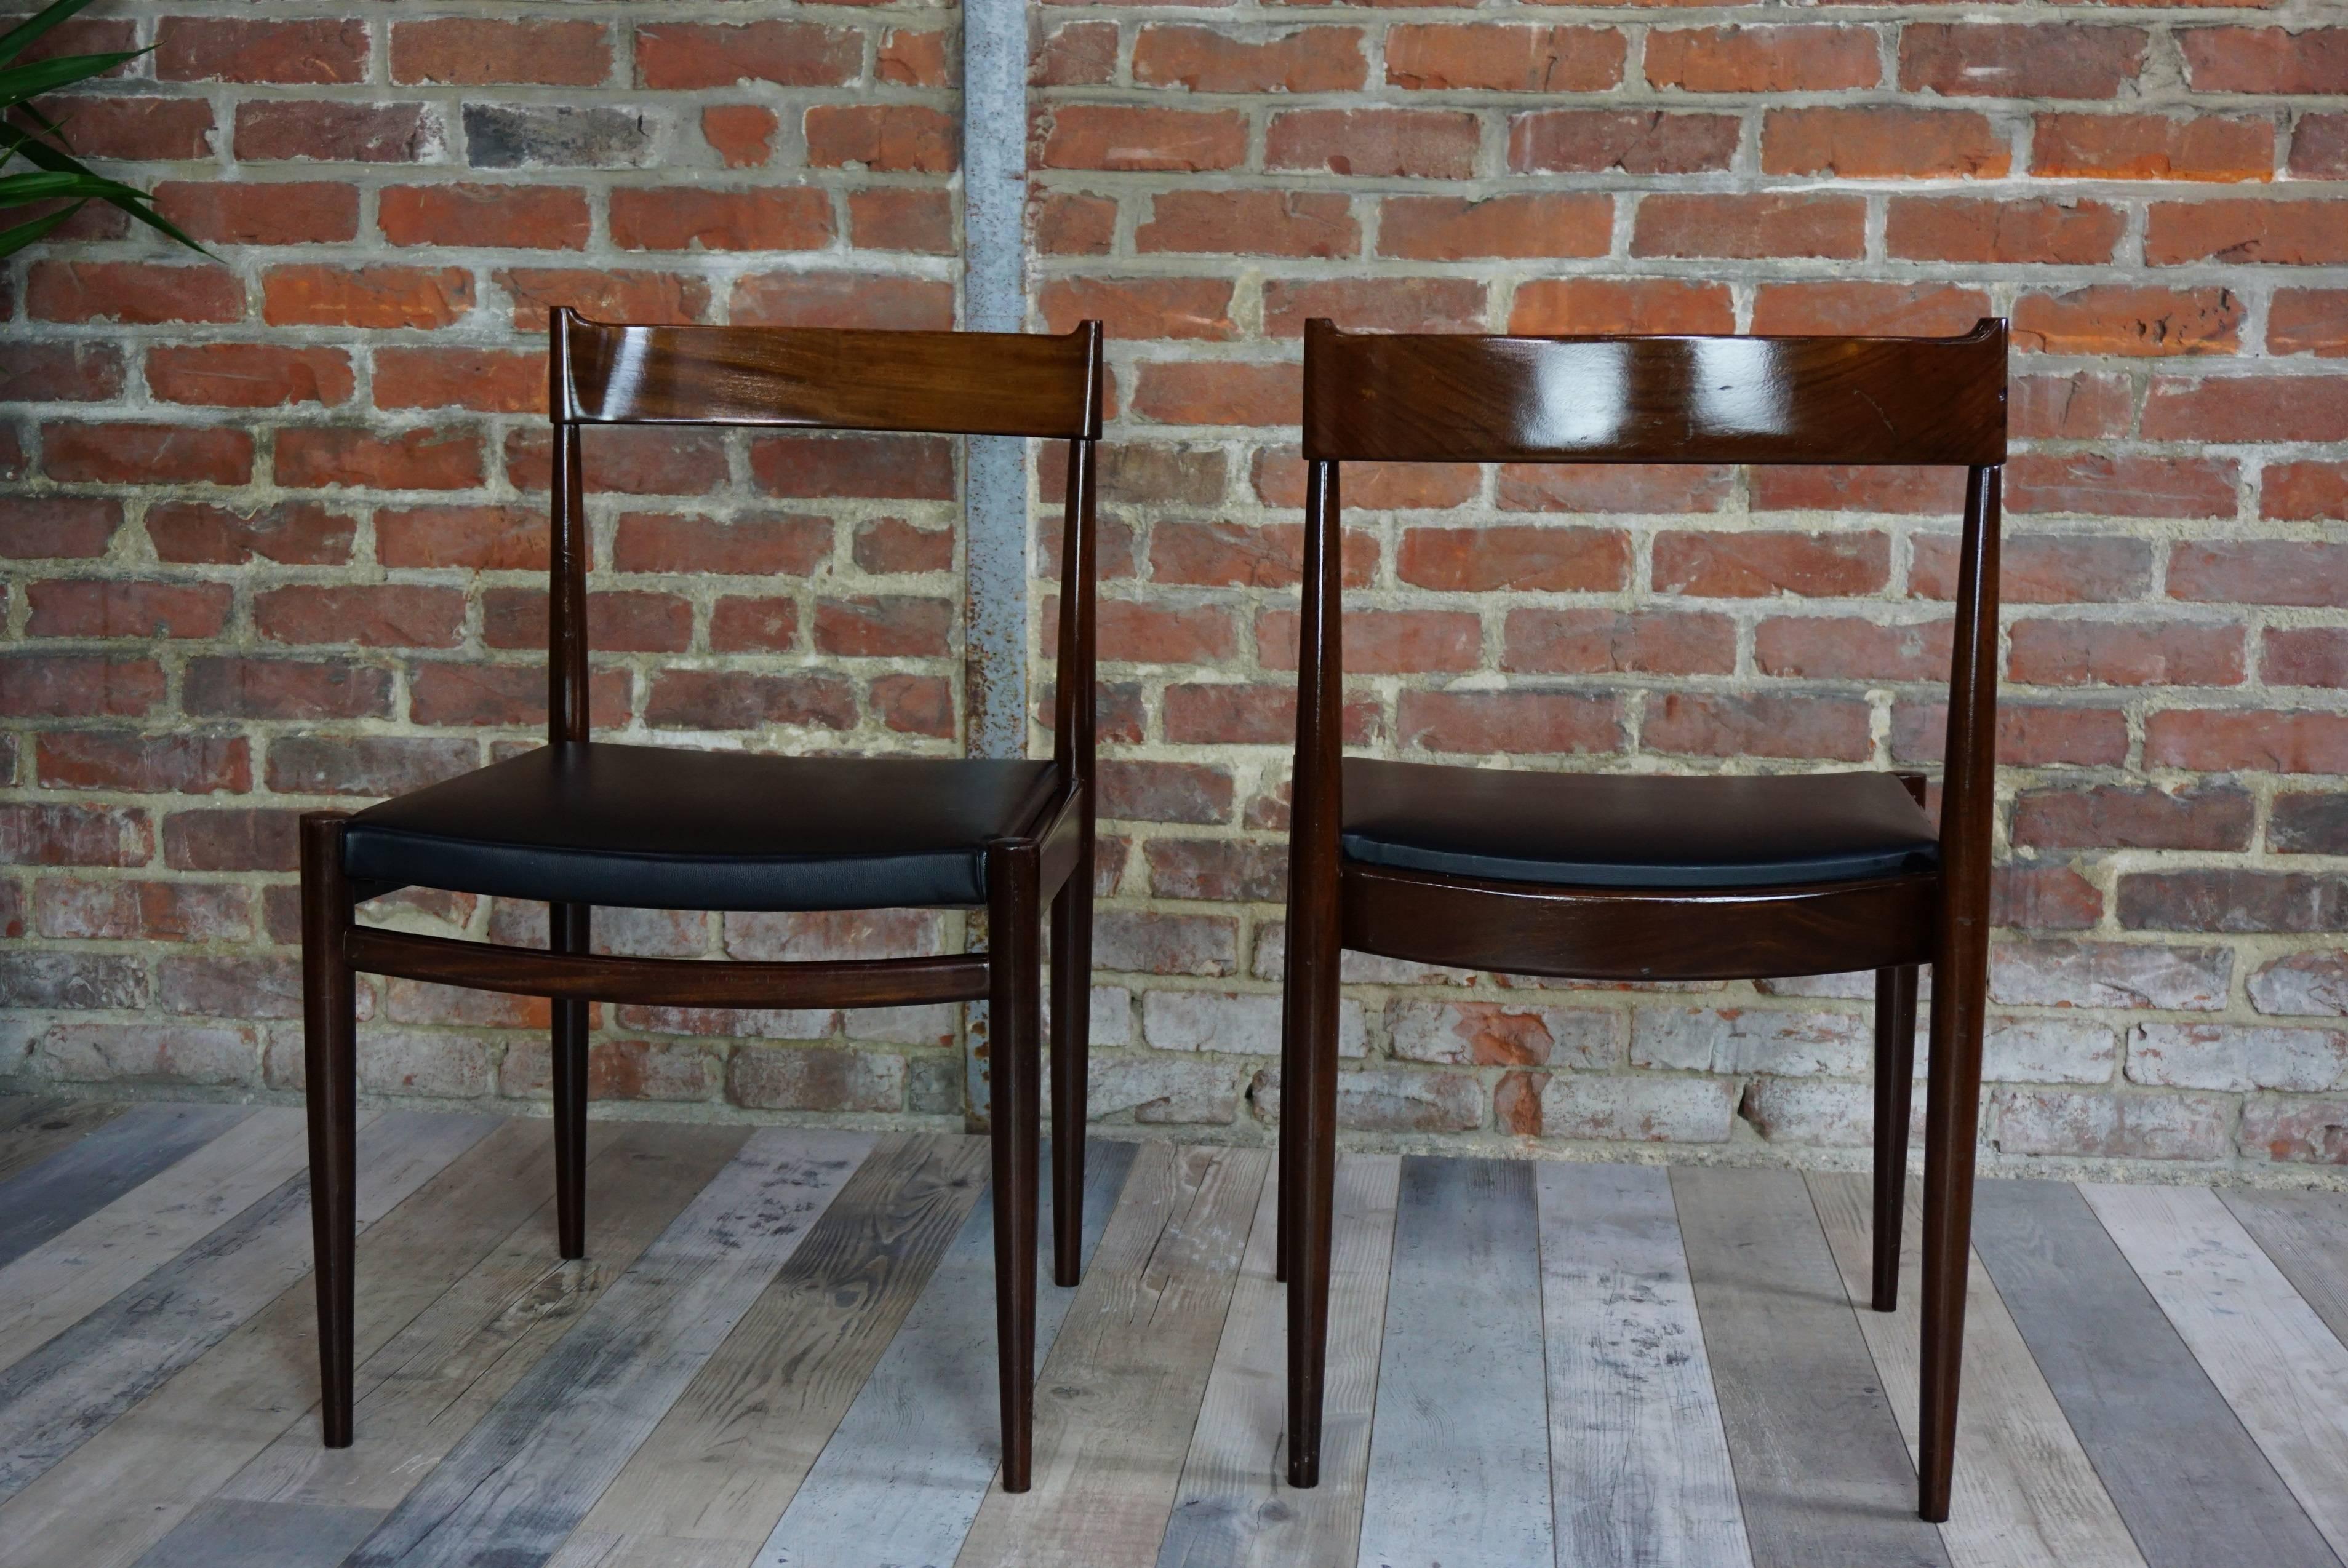 Faux Leather Pair of Teak Chairs and Faux Black Leather Design from the 1950s